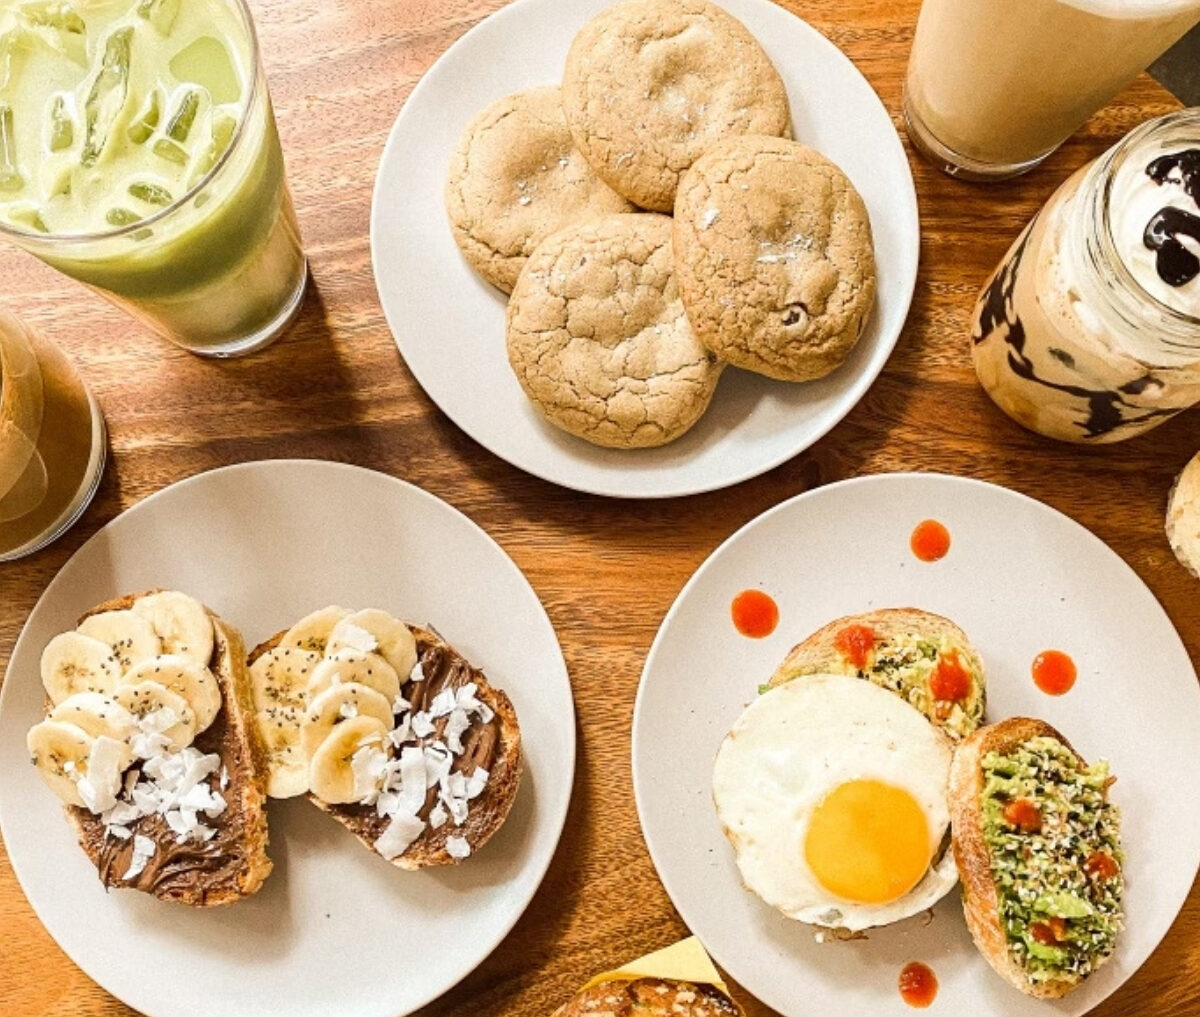 An array of coffee shop pastries, toasts with avocado and fried egg, plus iced coffee drinks.